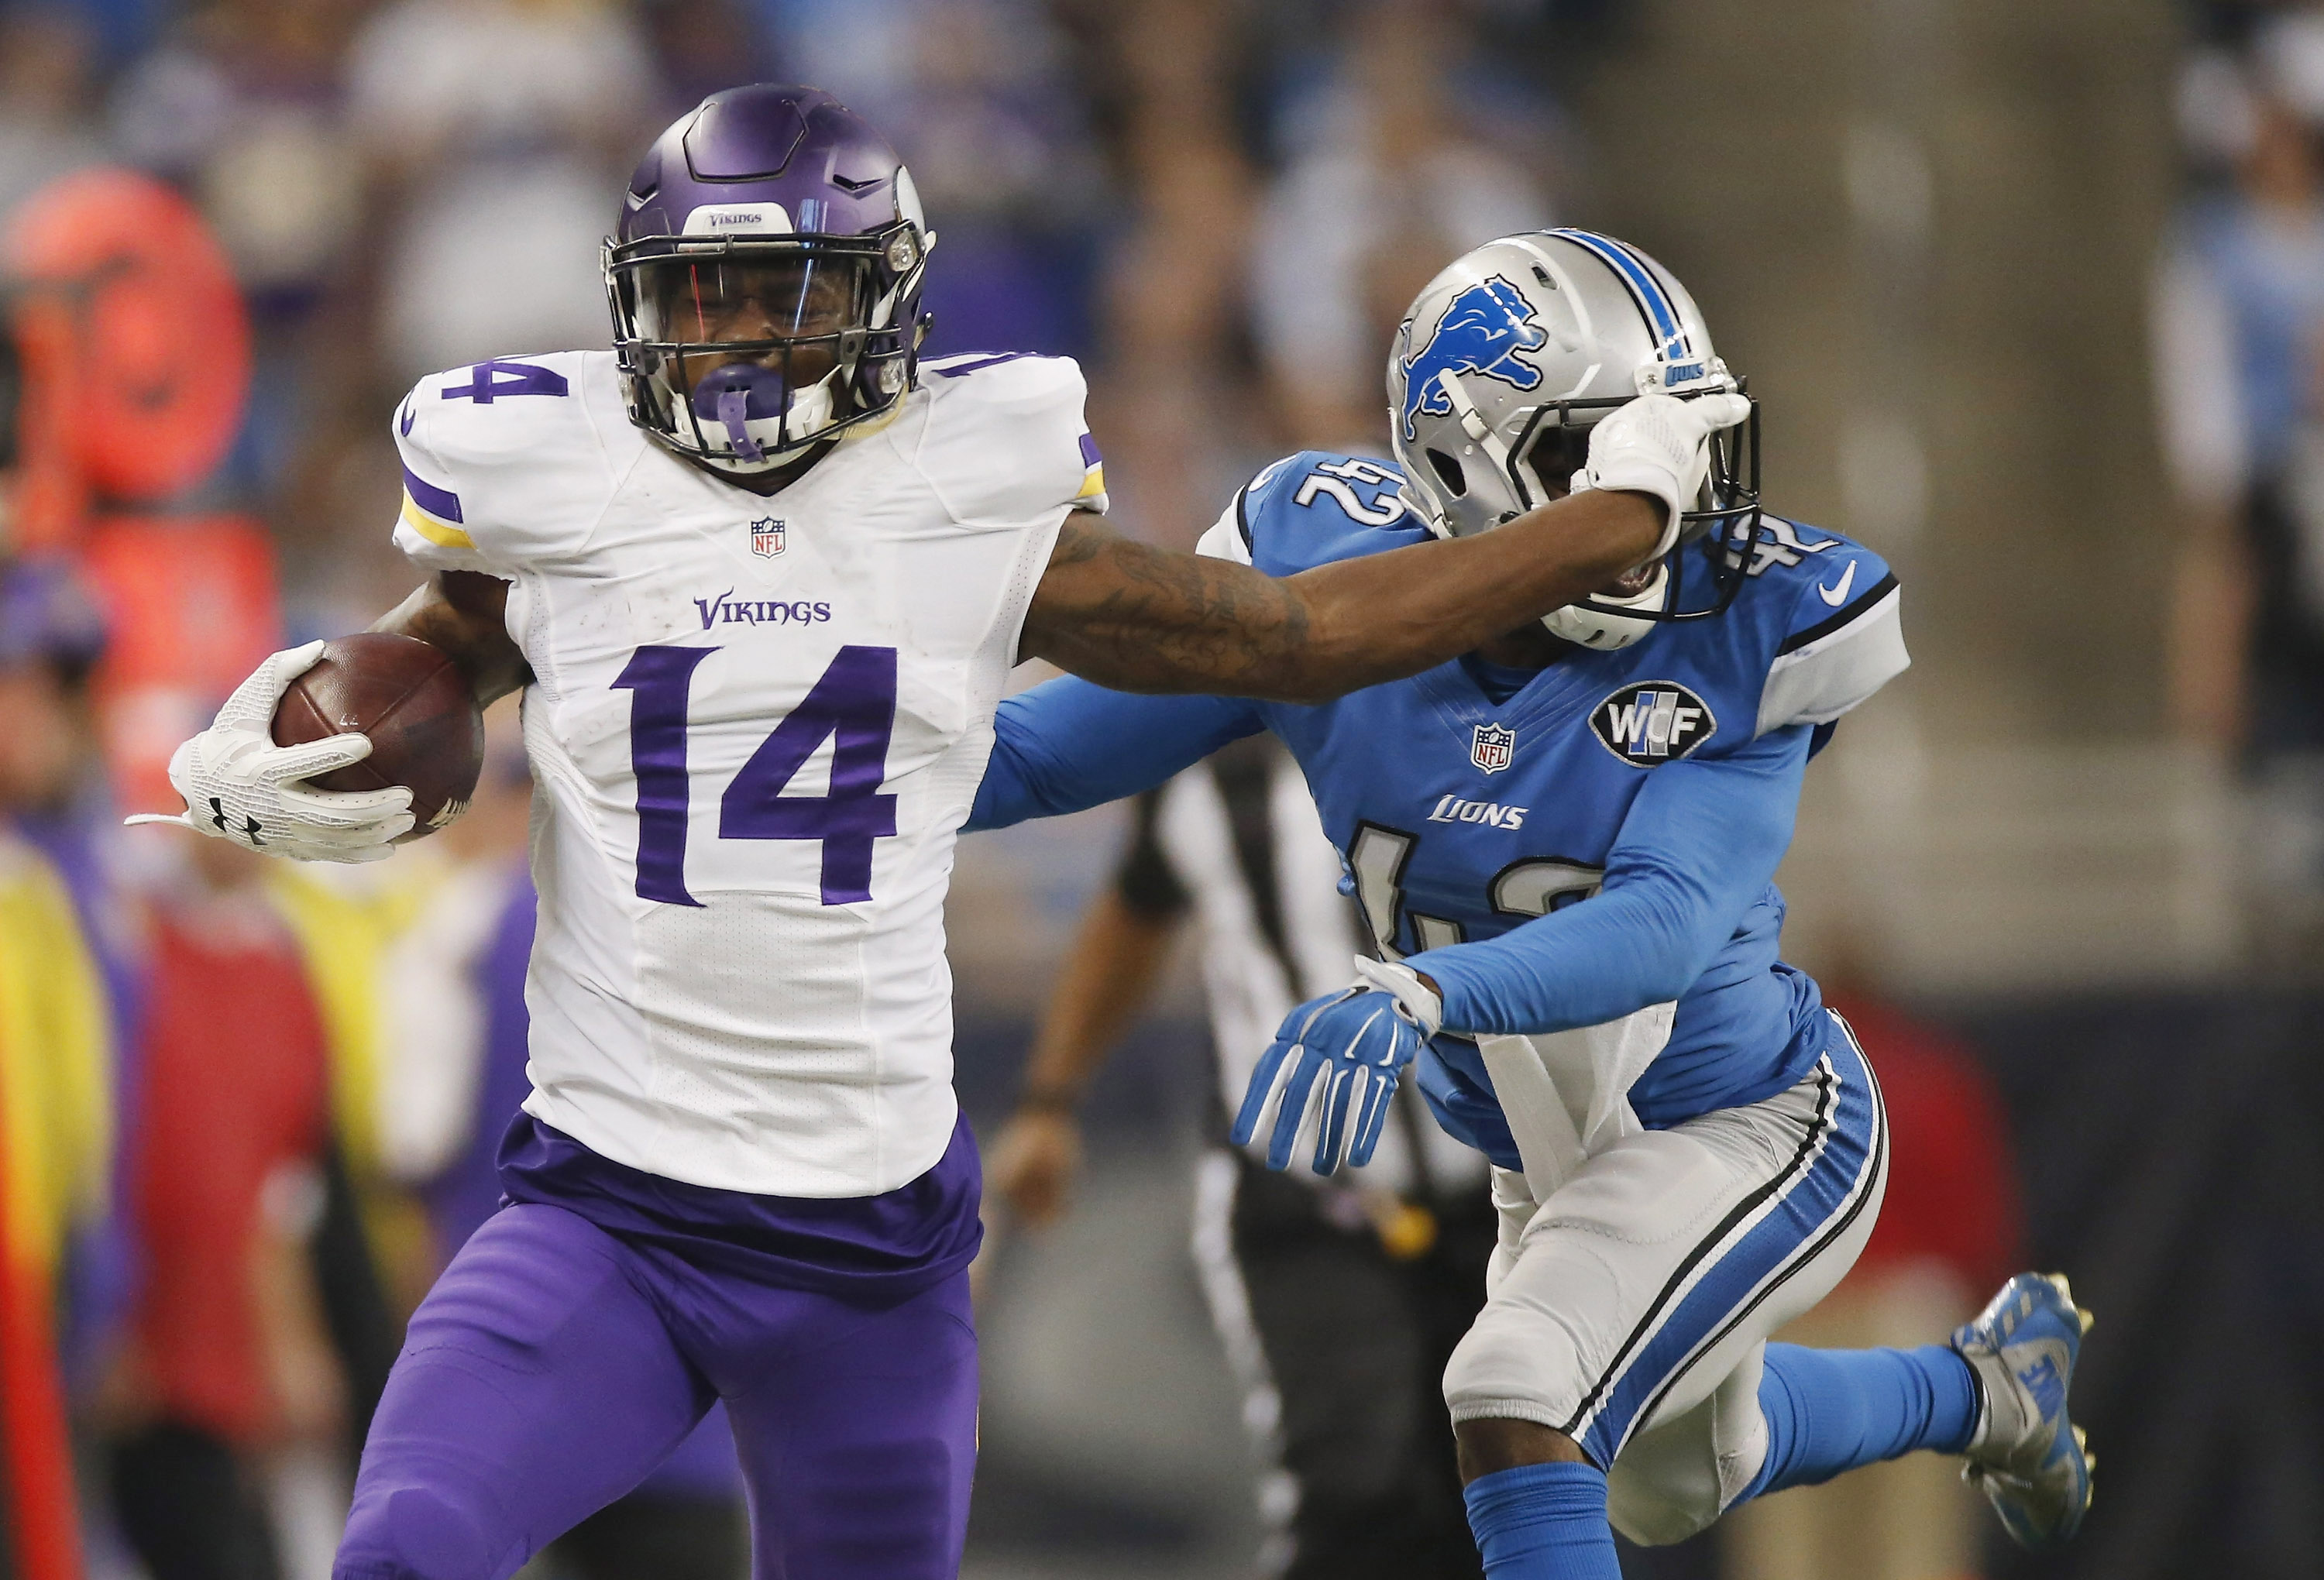 Stefon Diggs has emerged as one of the NFL's most explosive players. (Getty)